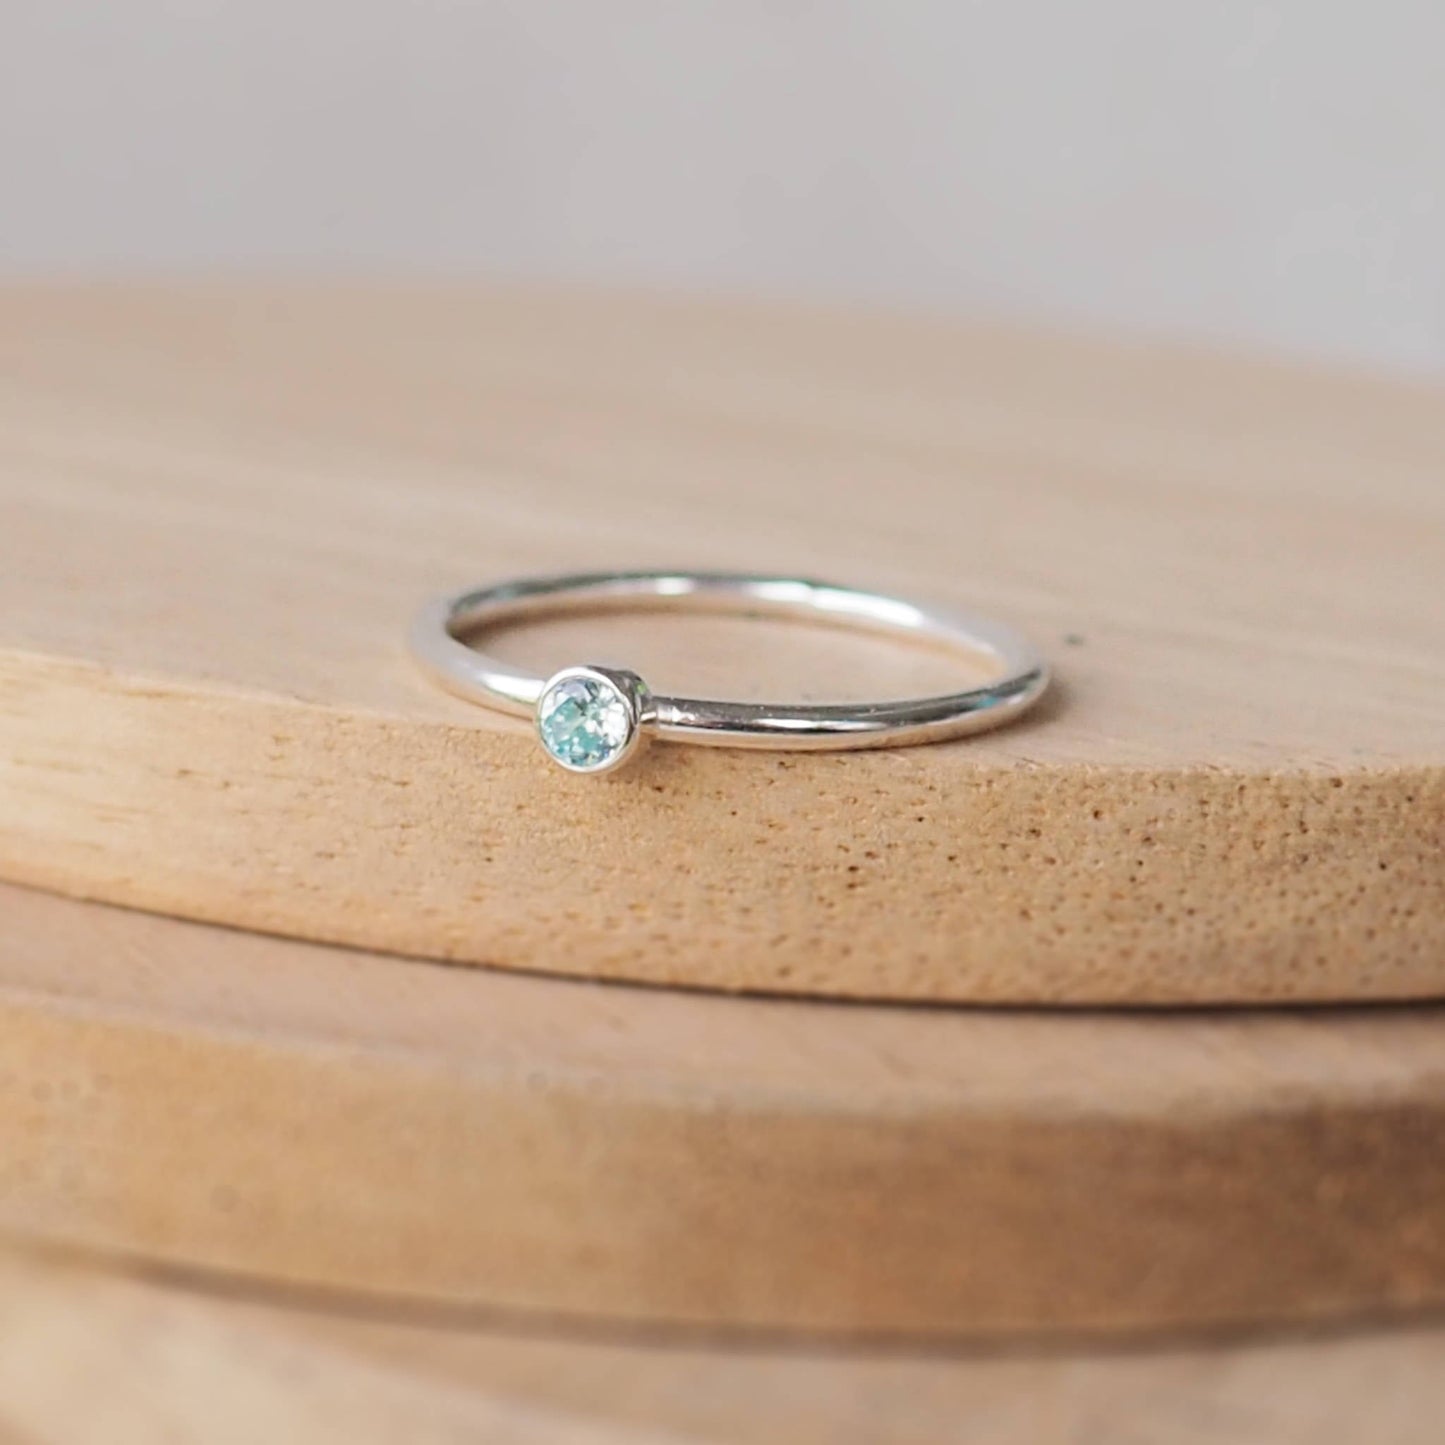 Aquamarine and Sterling Silver solitaire ring with an aqua coloured  round cubic zirconia measuring 3mm in size. A very simple minimalist ring made from Sterling Silver on a halo style band. Handmade in Scotland by maram jewellery